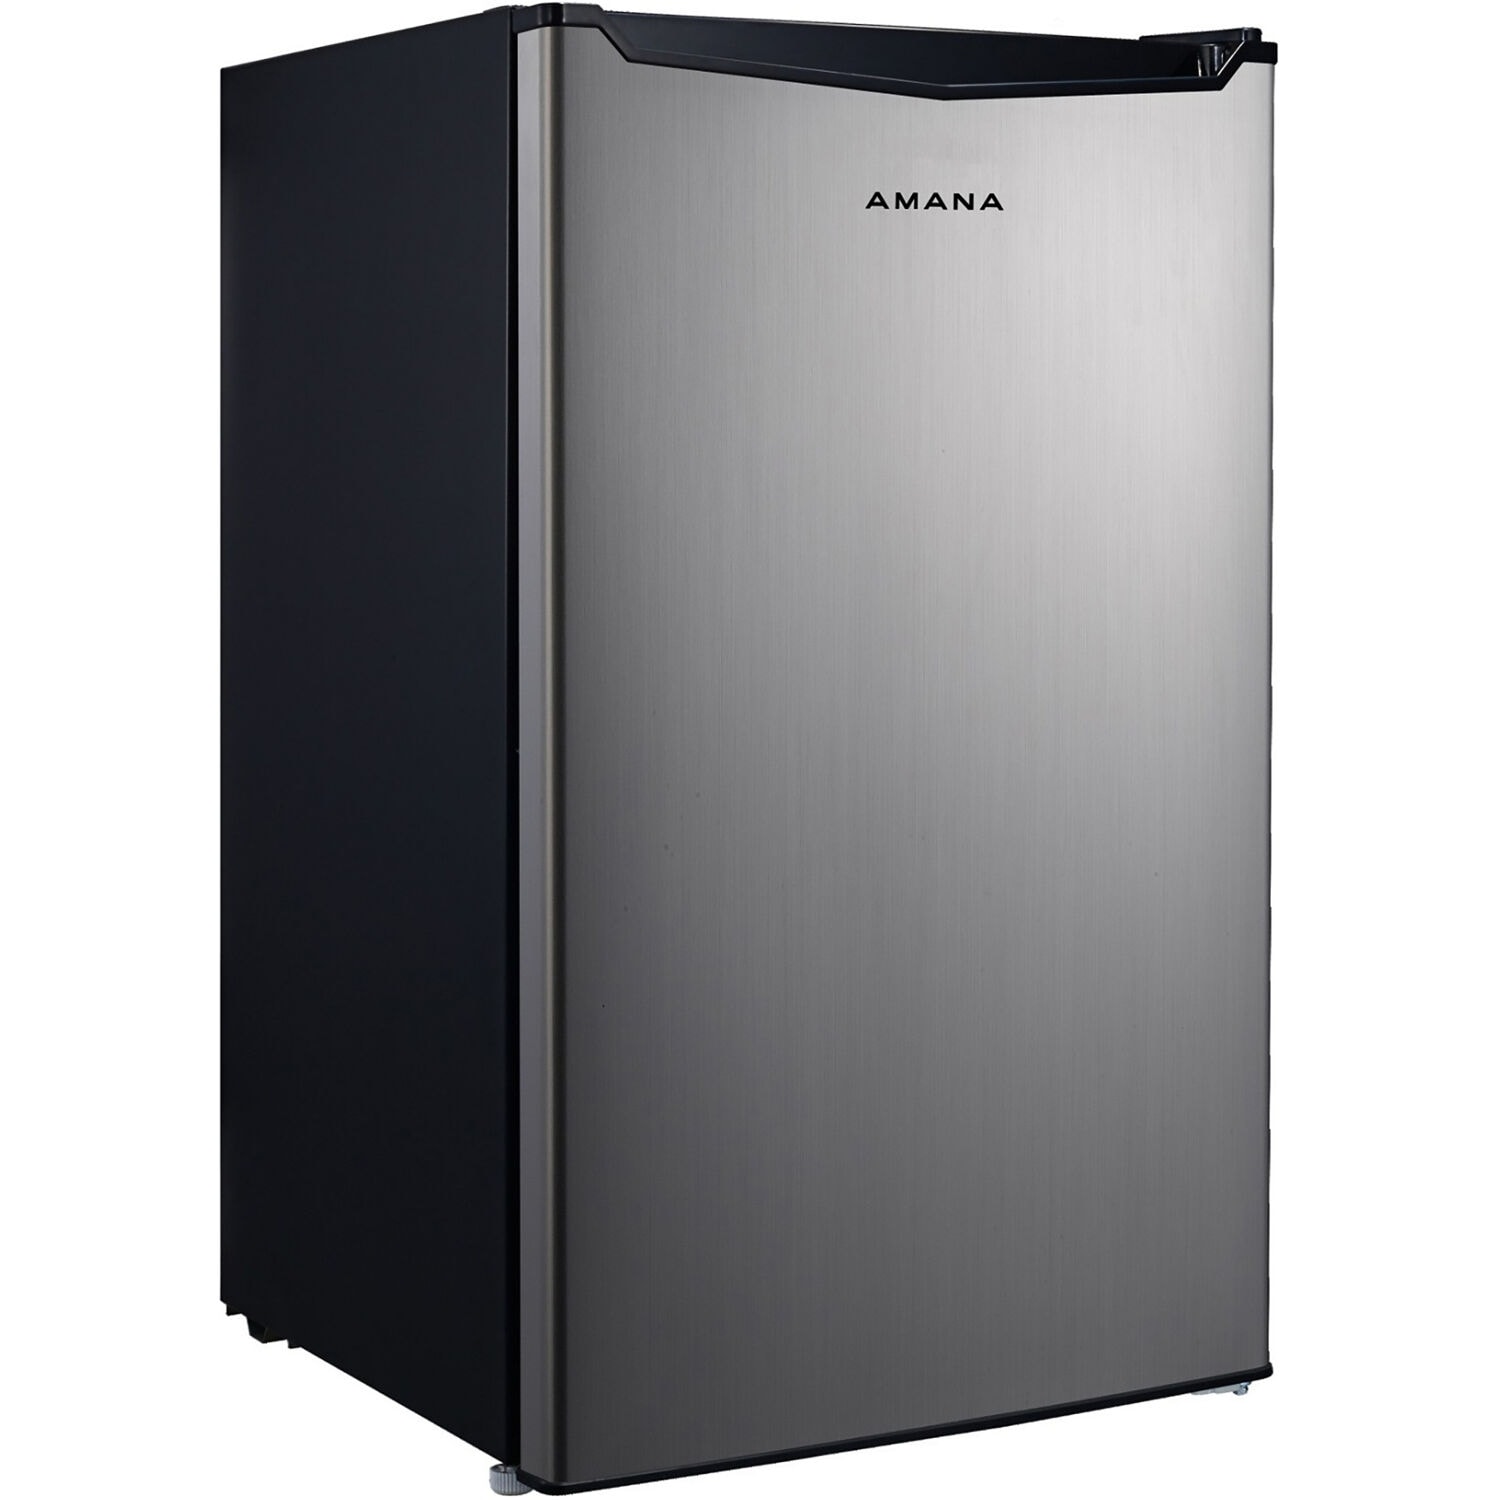 3.2 Cu.Ft Mini Fridge with Freezer, Single Door Small Refrigerator, 6  Settings Mechanical Thermostat, One-Touch Defrosting System, Energy Saving,  Dorm